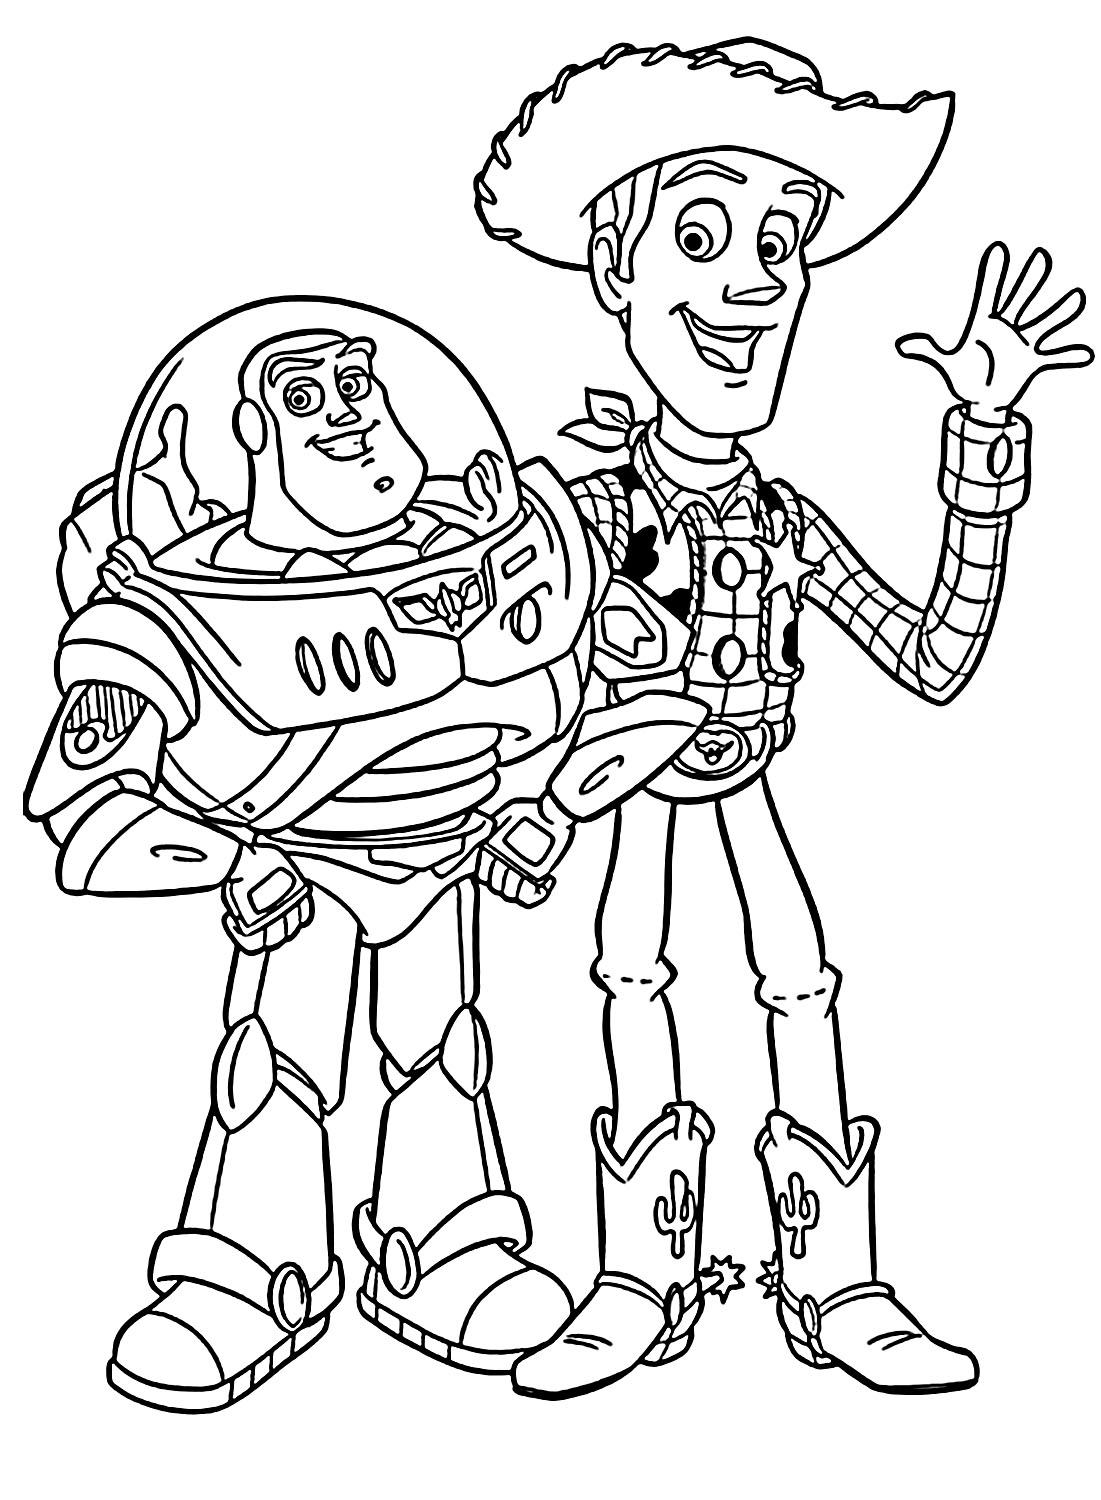 Woody e Buzz di Toy Story